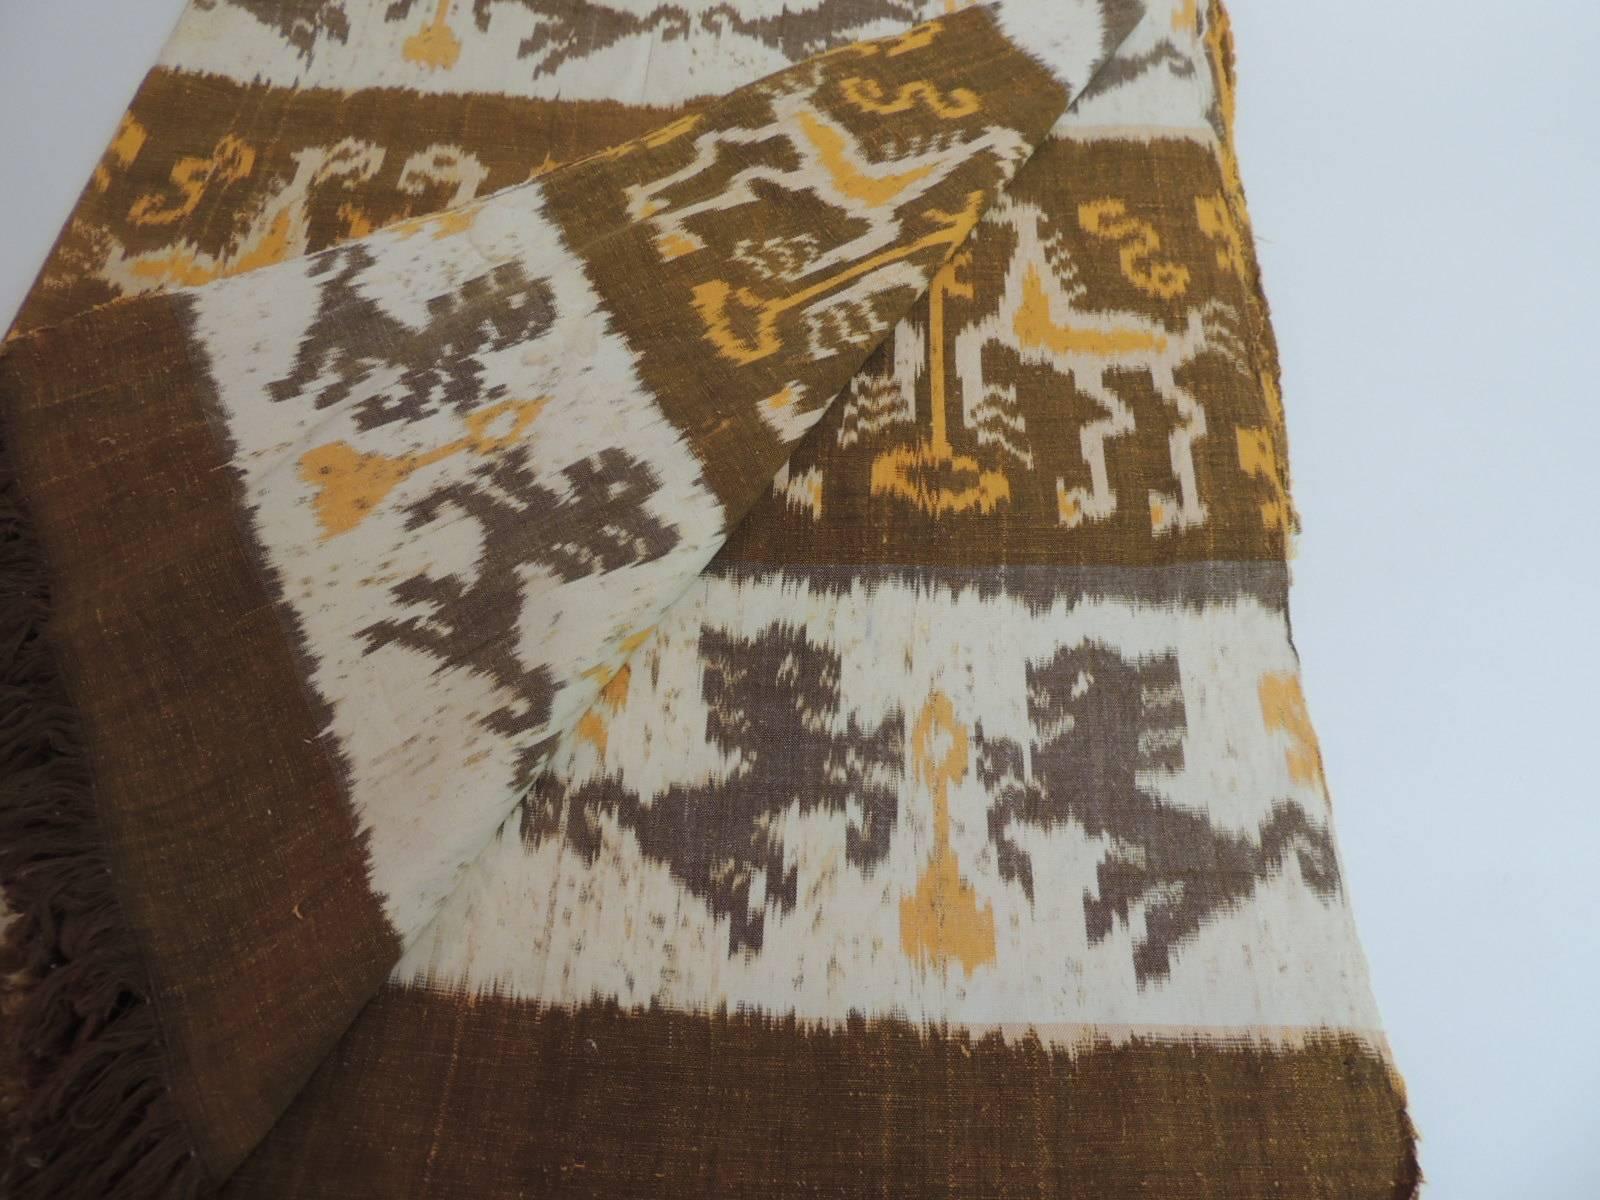 Tribal Vintage Woven Yellow and Natural Ikat Artisanal Textile Panel with Fringes